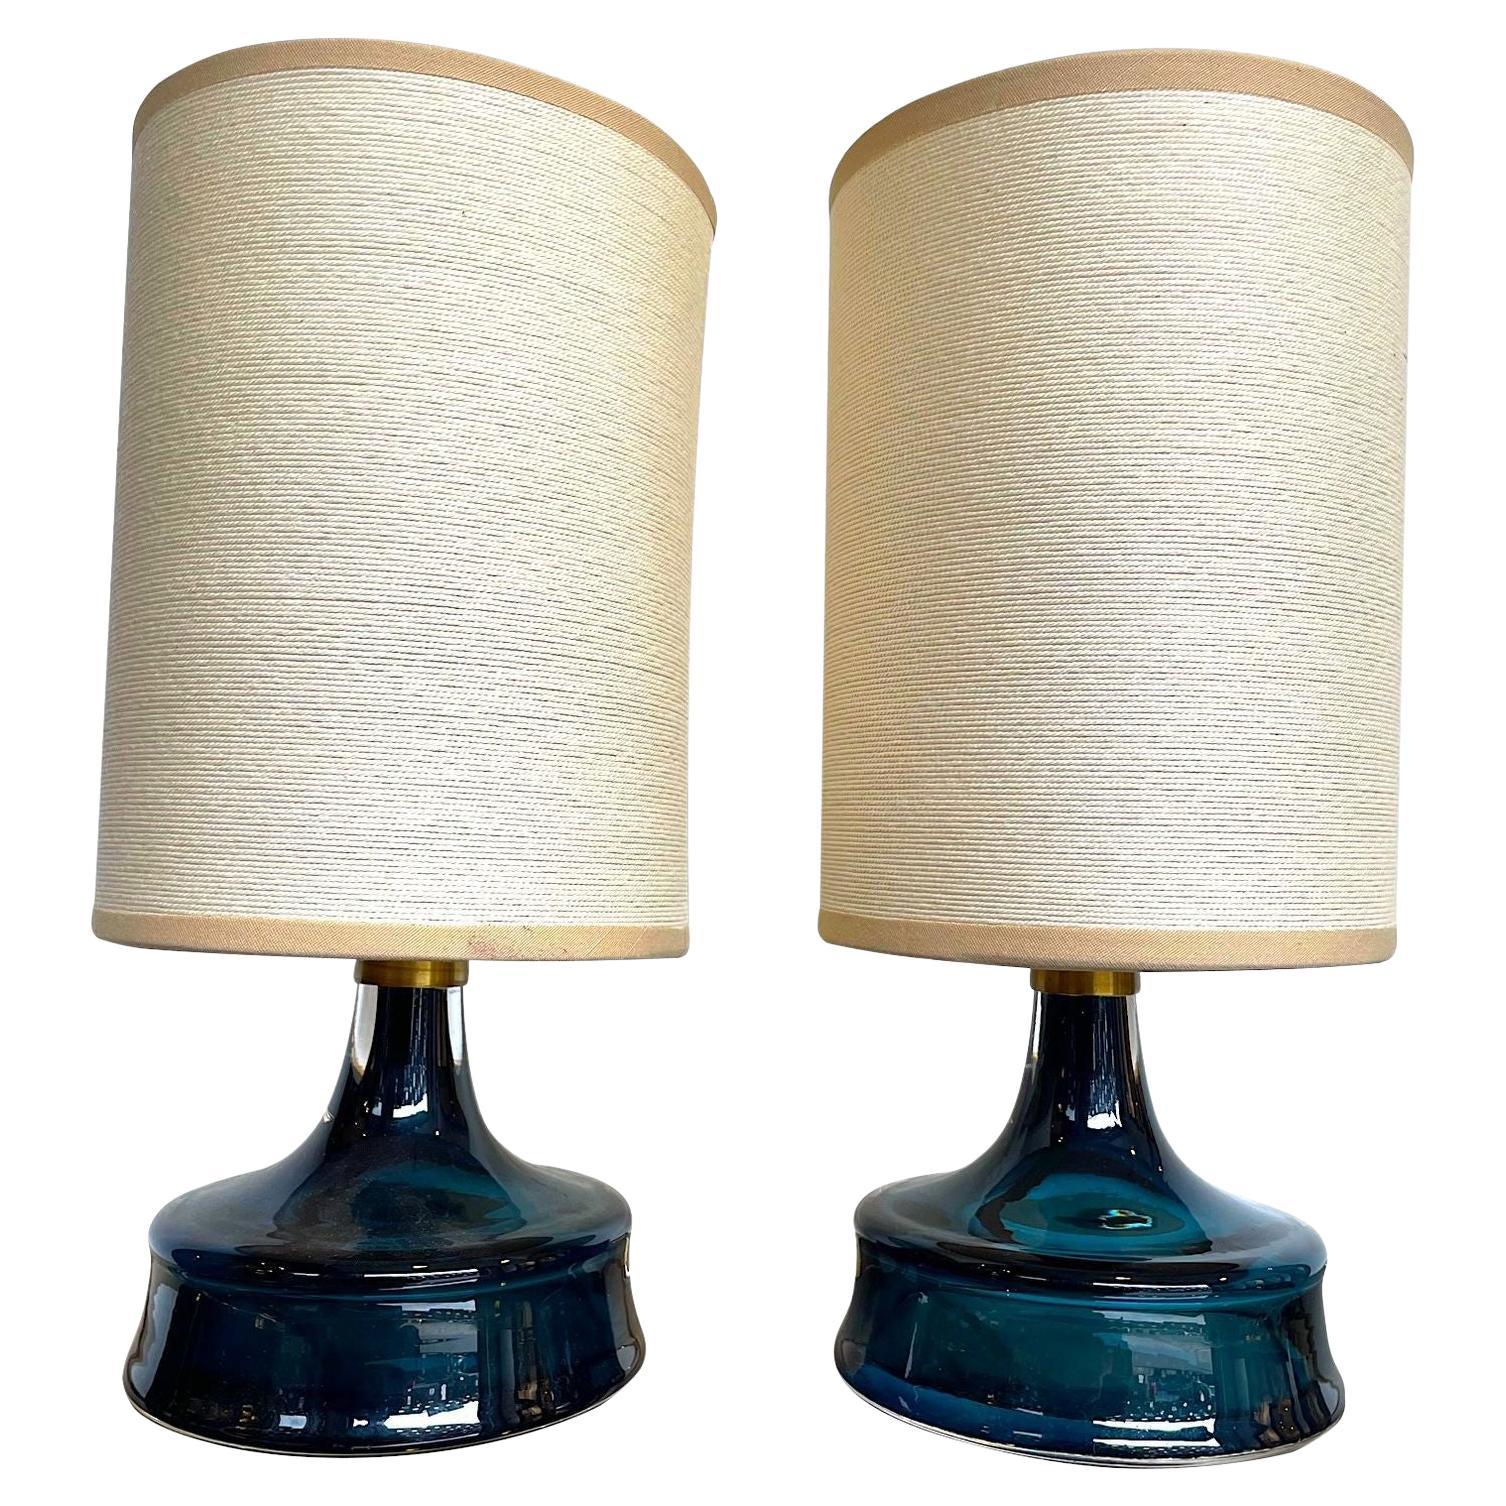 Pair of 1960s Swedish Orrefors Blue Glass Lamps with Brass Collars